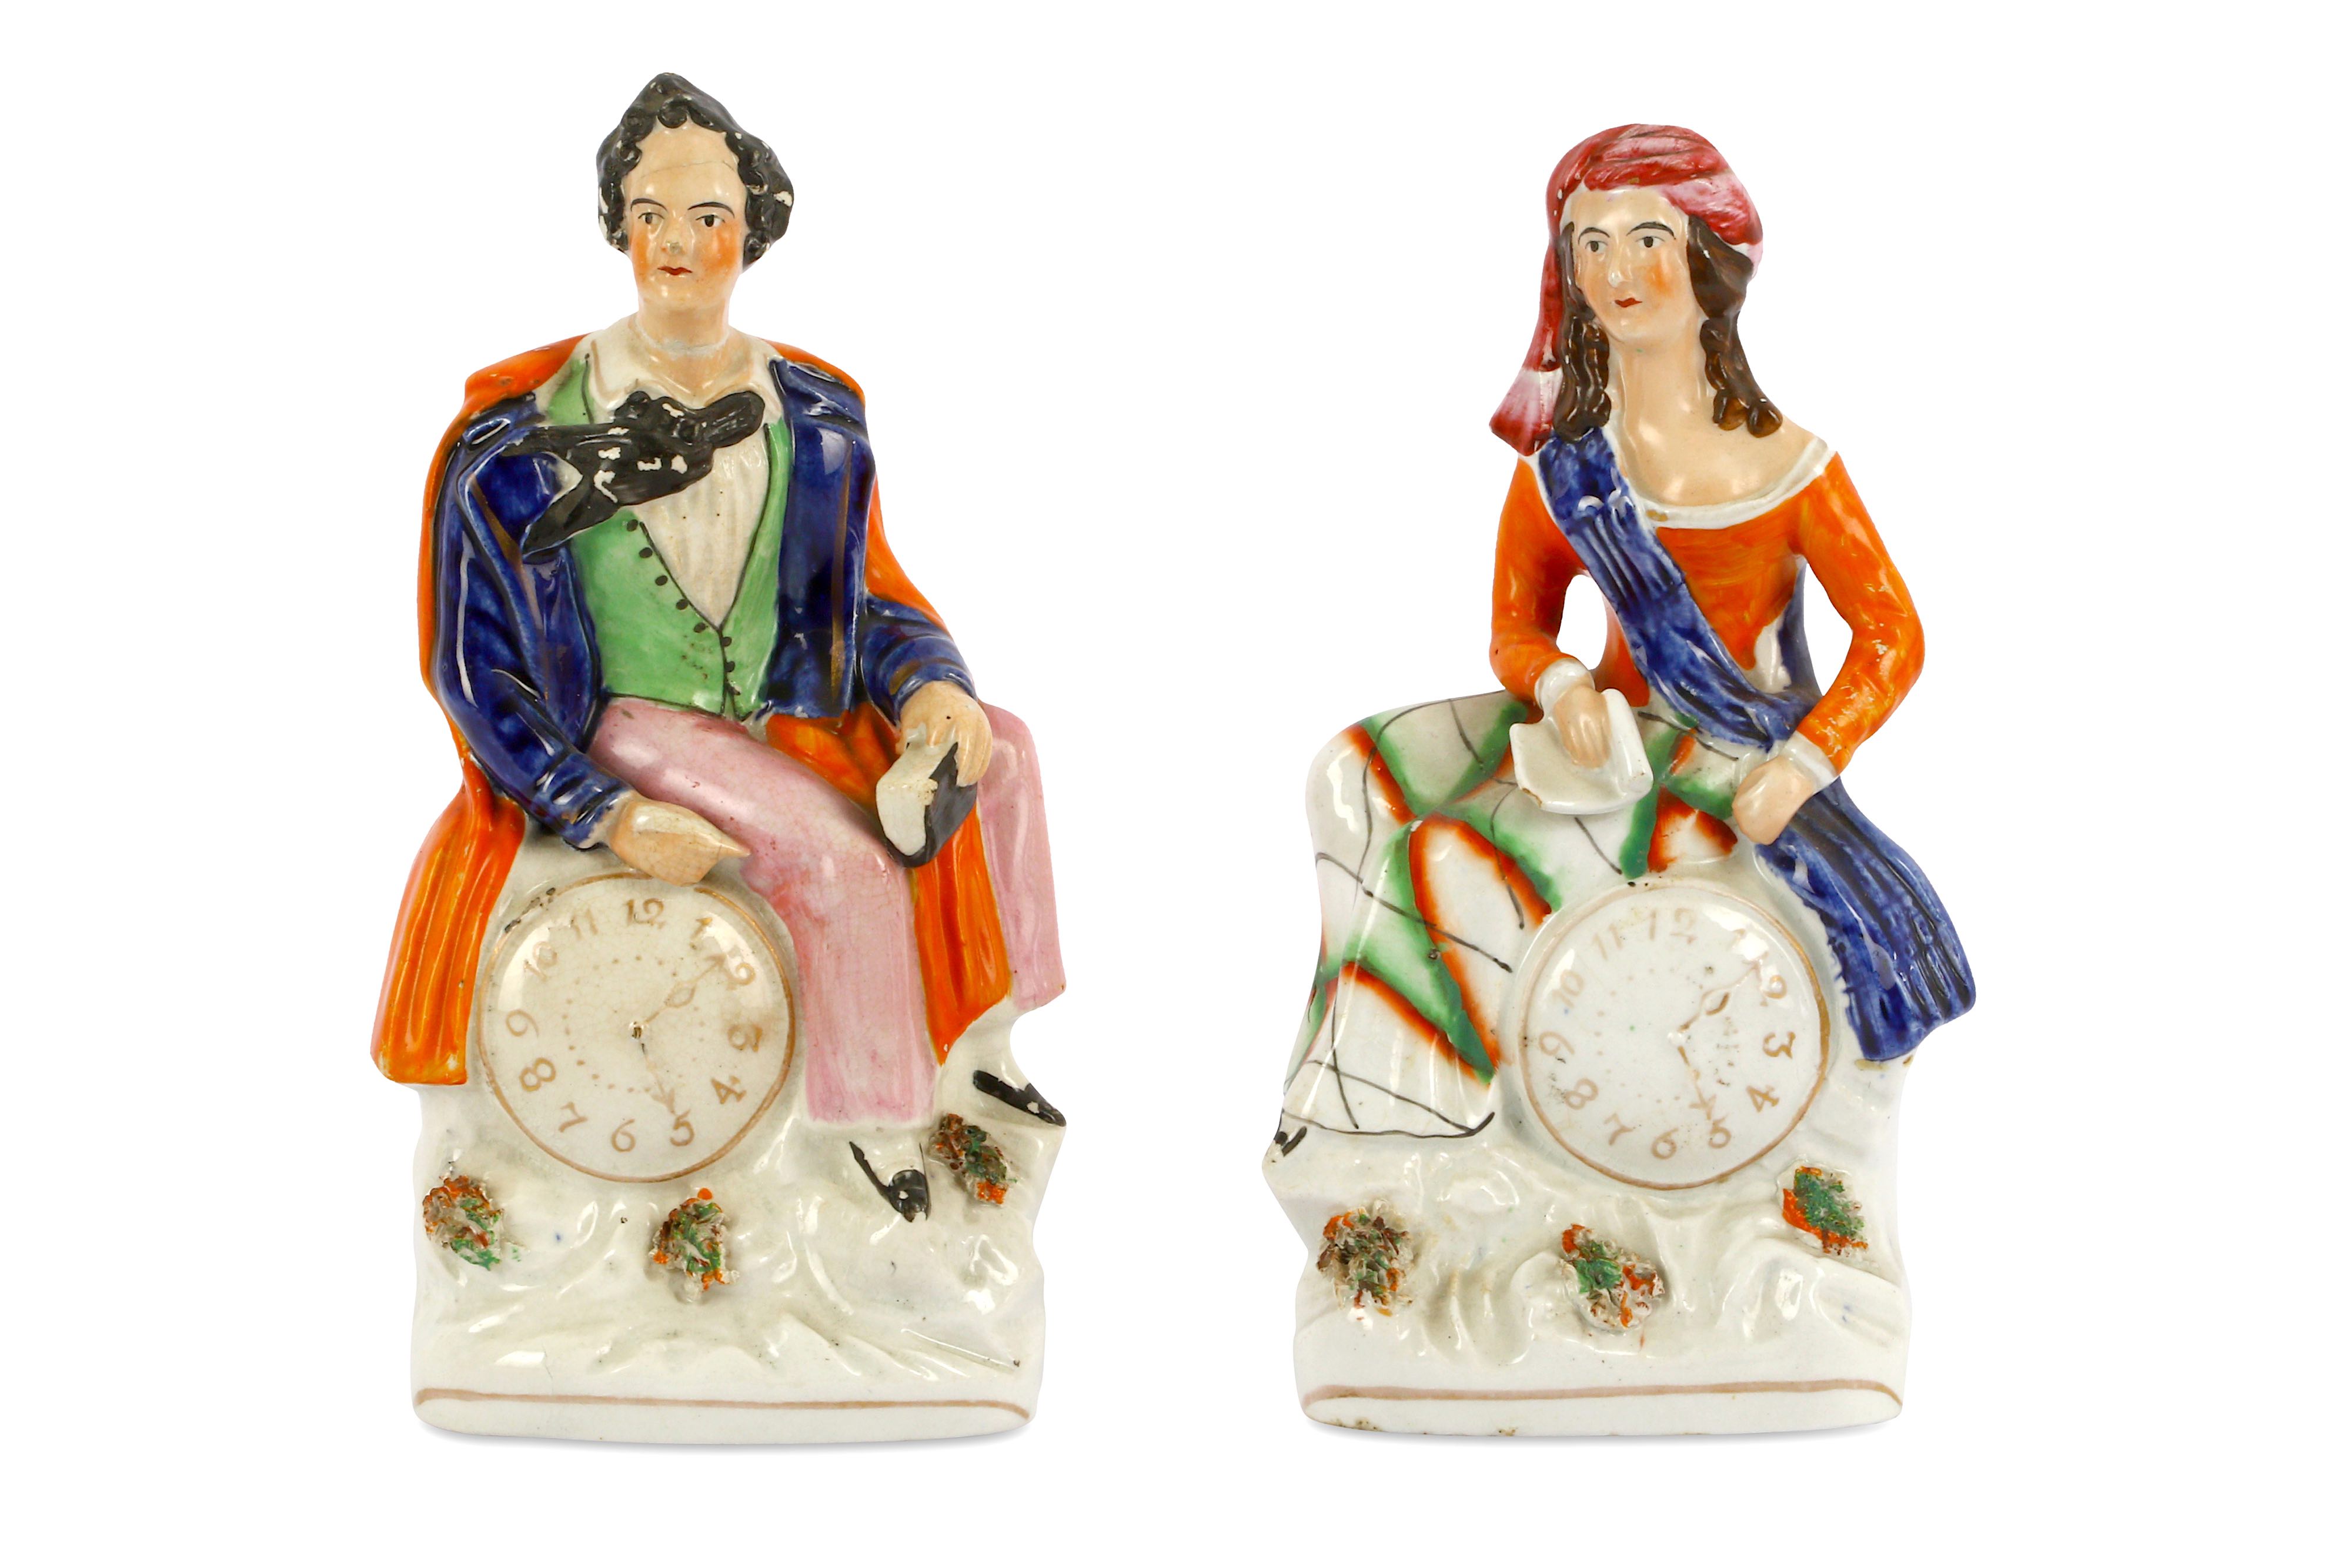 A PAIR OF GLAZED STAFFORDSHIRE FIGURES OF LORD BYRON AND TERESA MAKRI